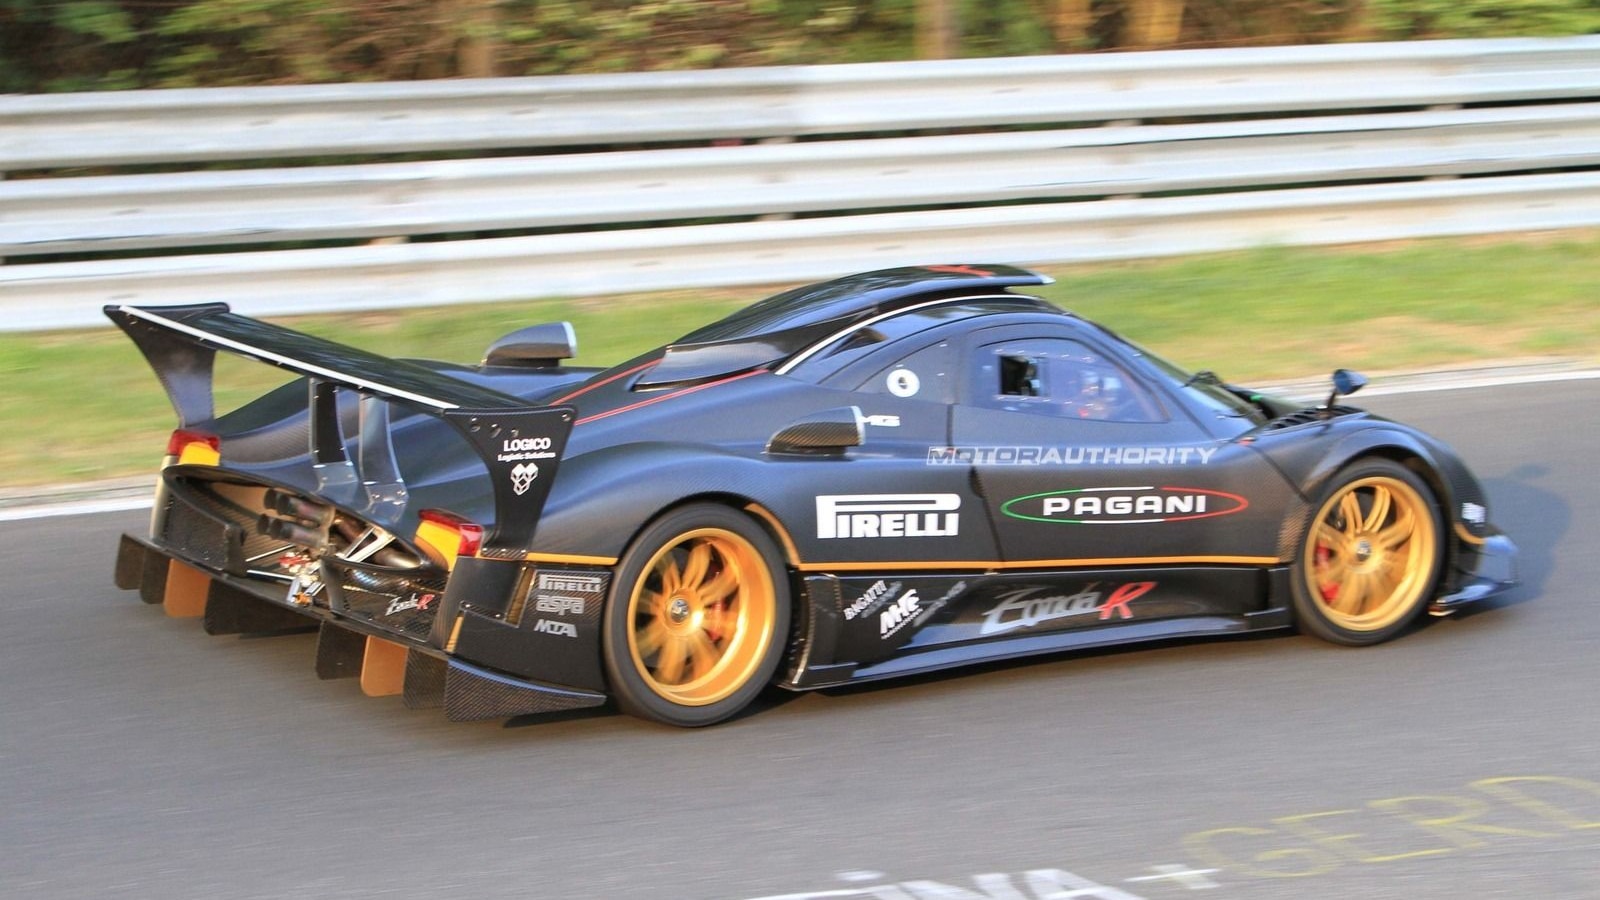 Pagani Zonda R spied on the 'Ring setting new 6:47 lap time